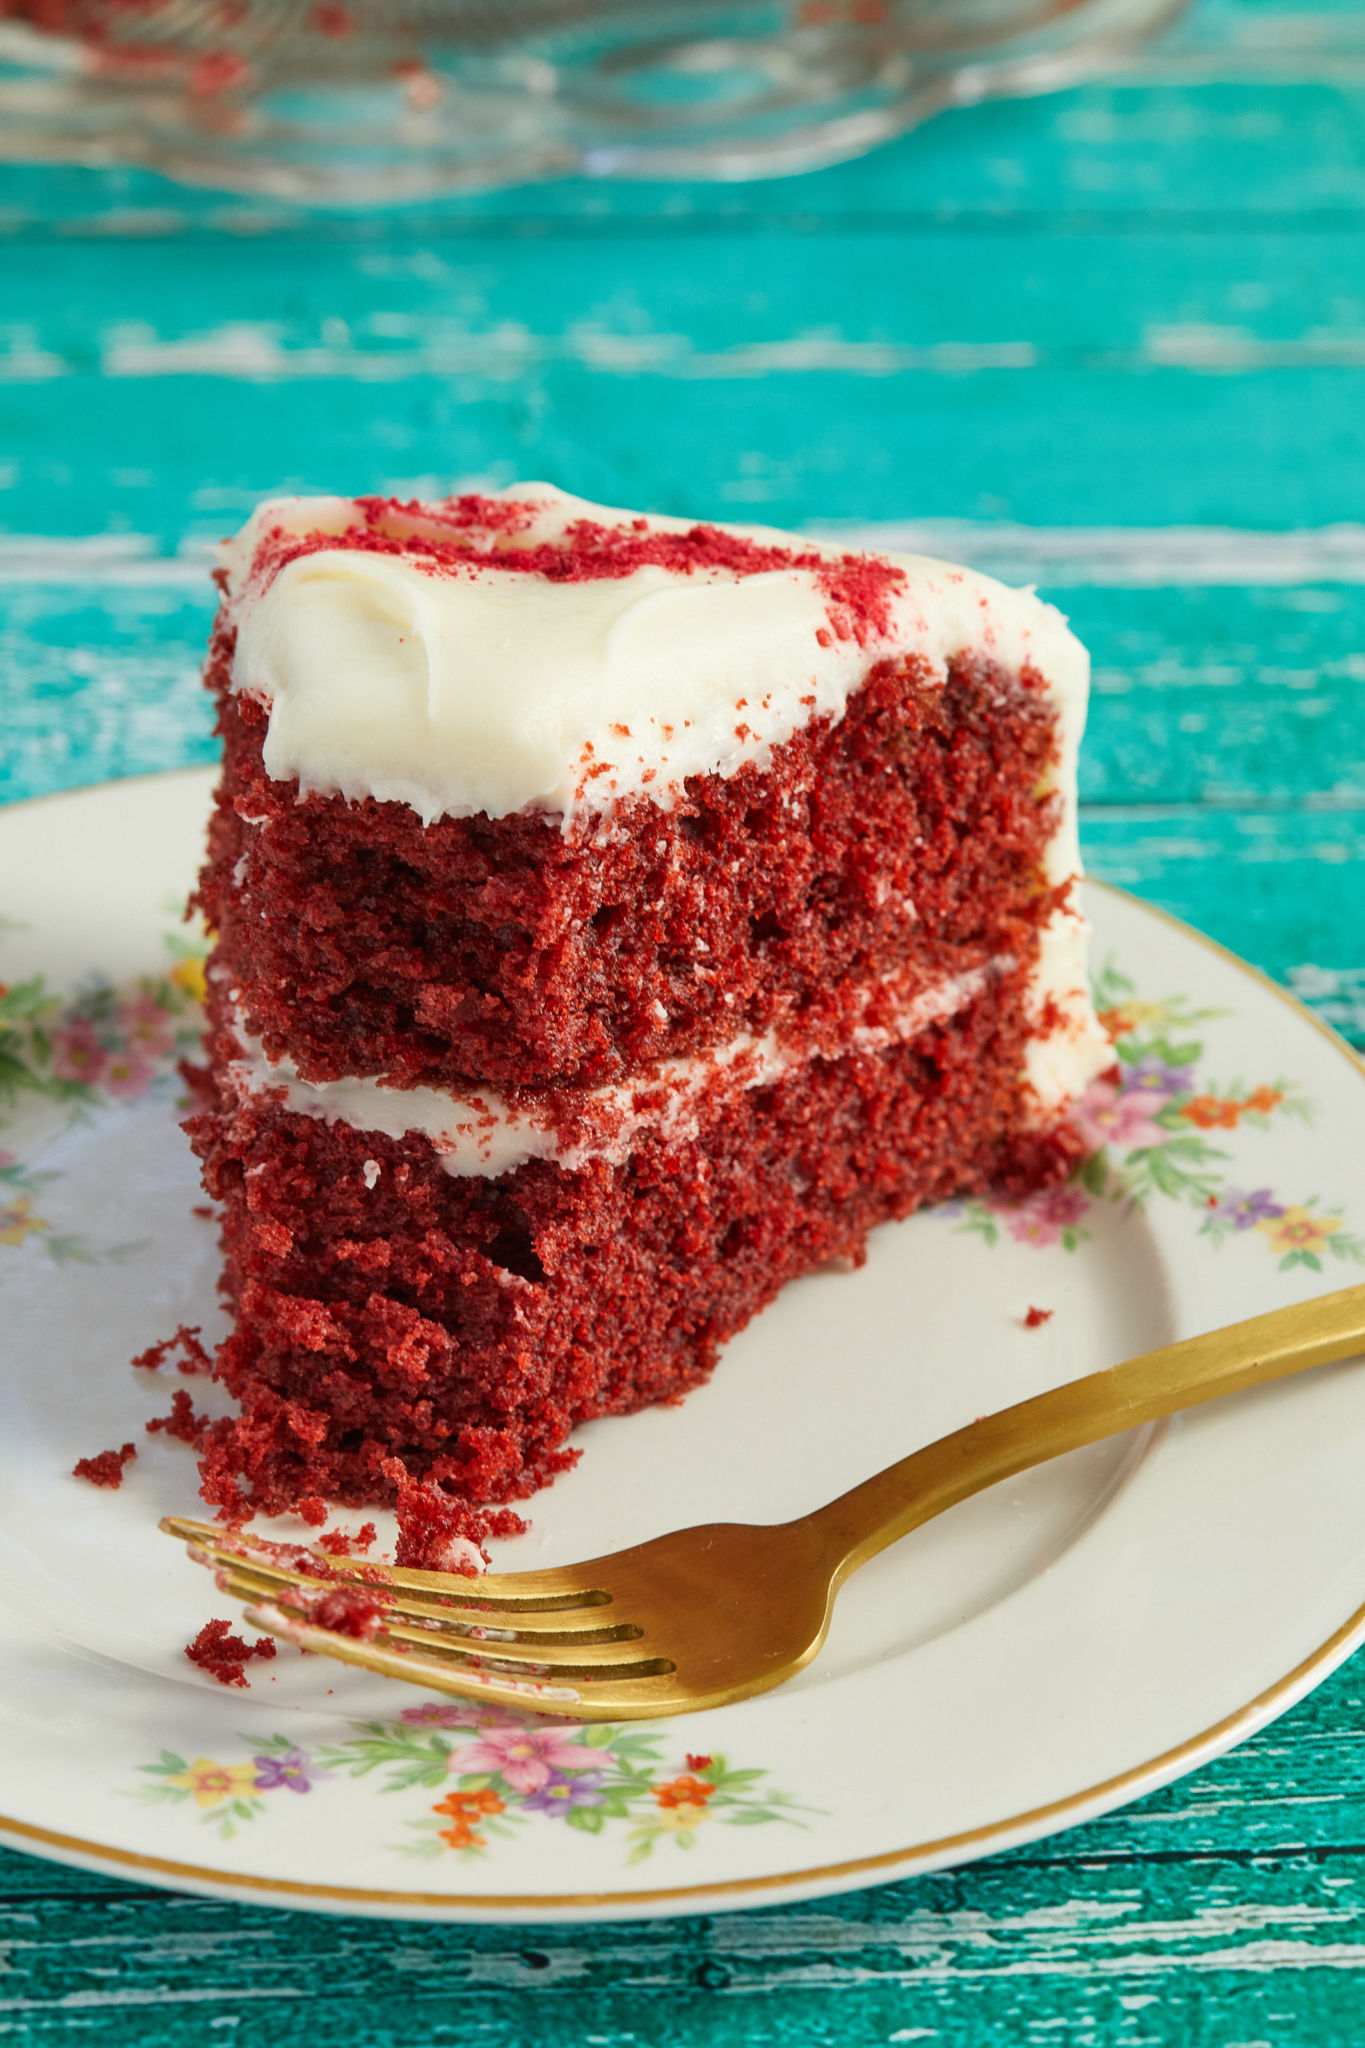 A close up of the interior of a slice of red velvet cake, to show texture and consistency — on a plate with a gold fork.